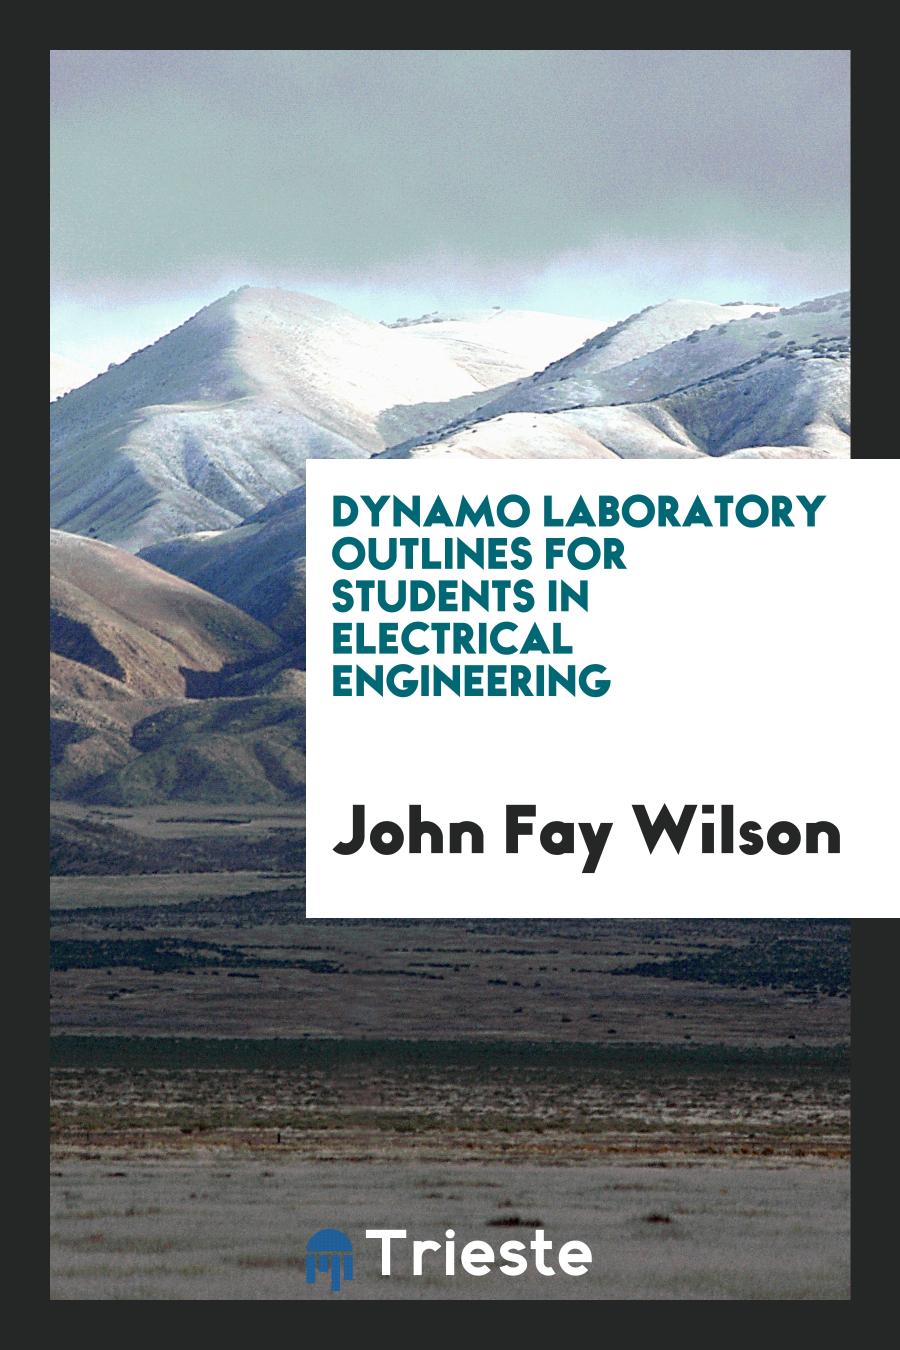 John Fay Wilson - Dynamo Laboratory Outlines for Students in Electrical Engineering